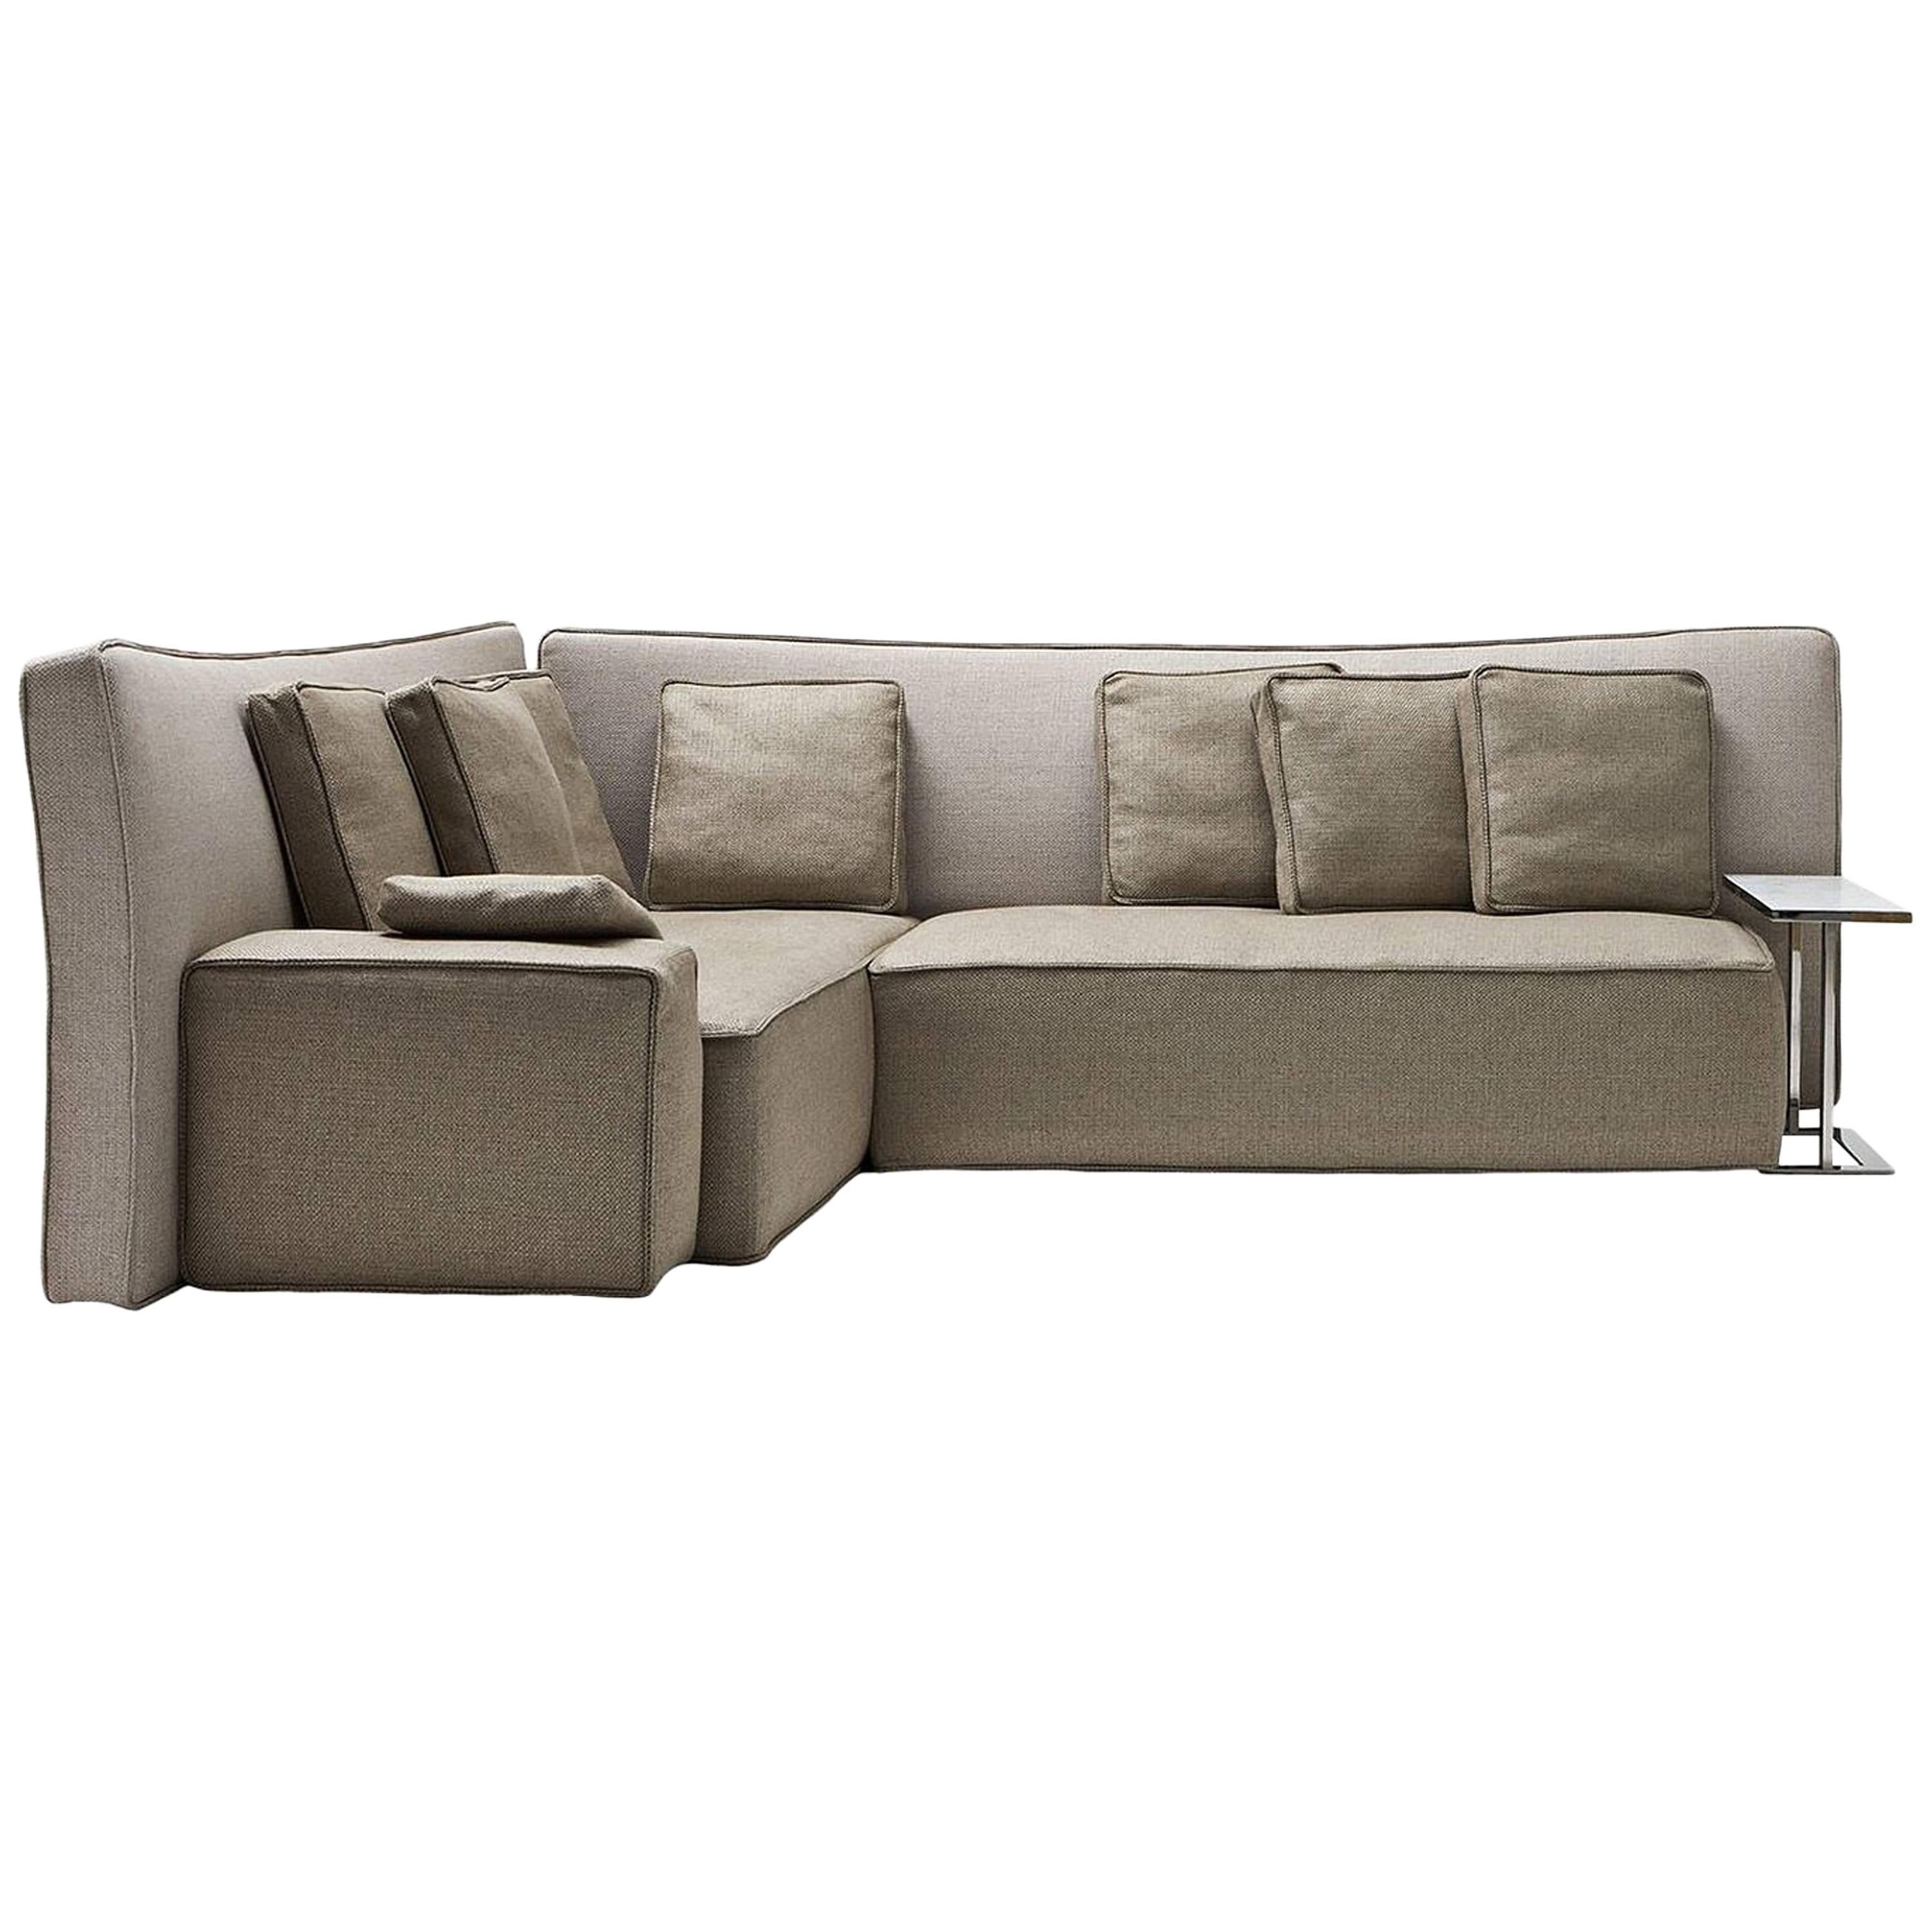 "Wow" Composition C1 or C2 Sectional Sofa in Goose Feather by P. Starck, Driade